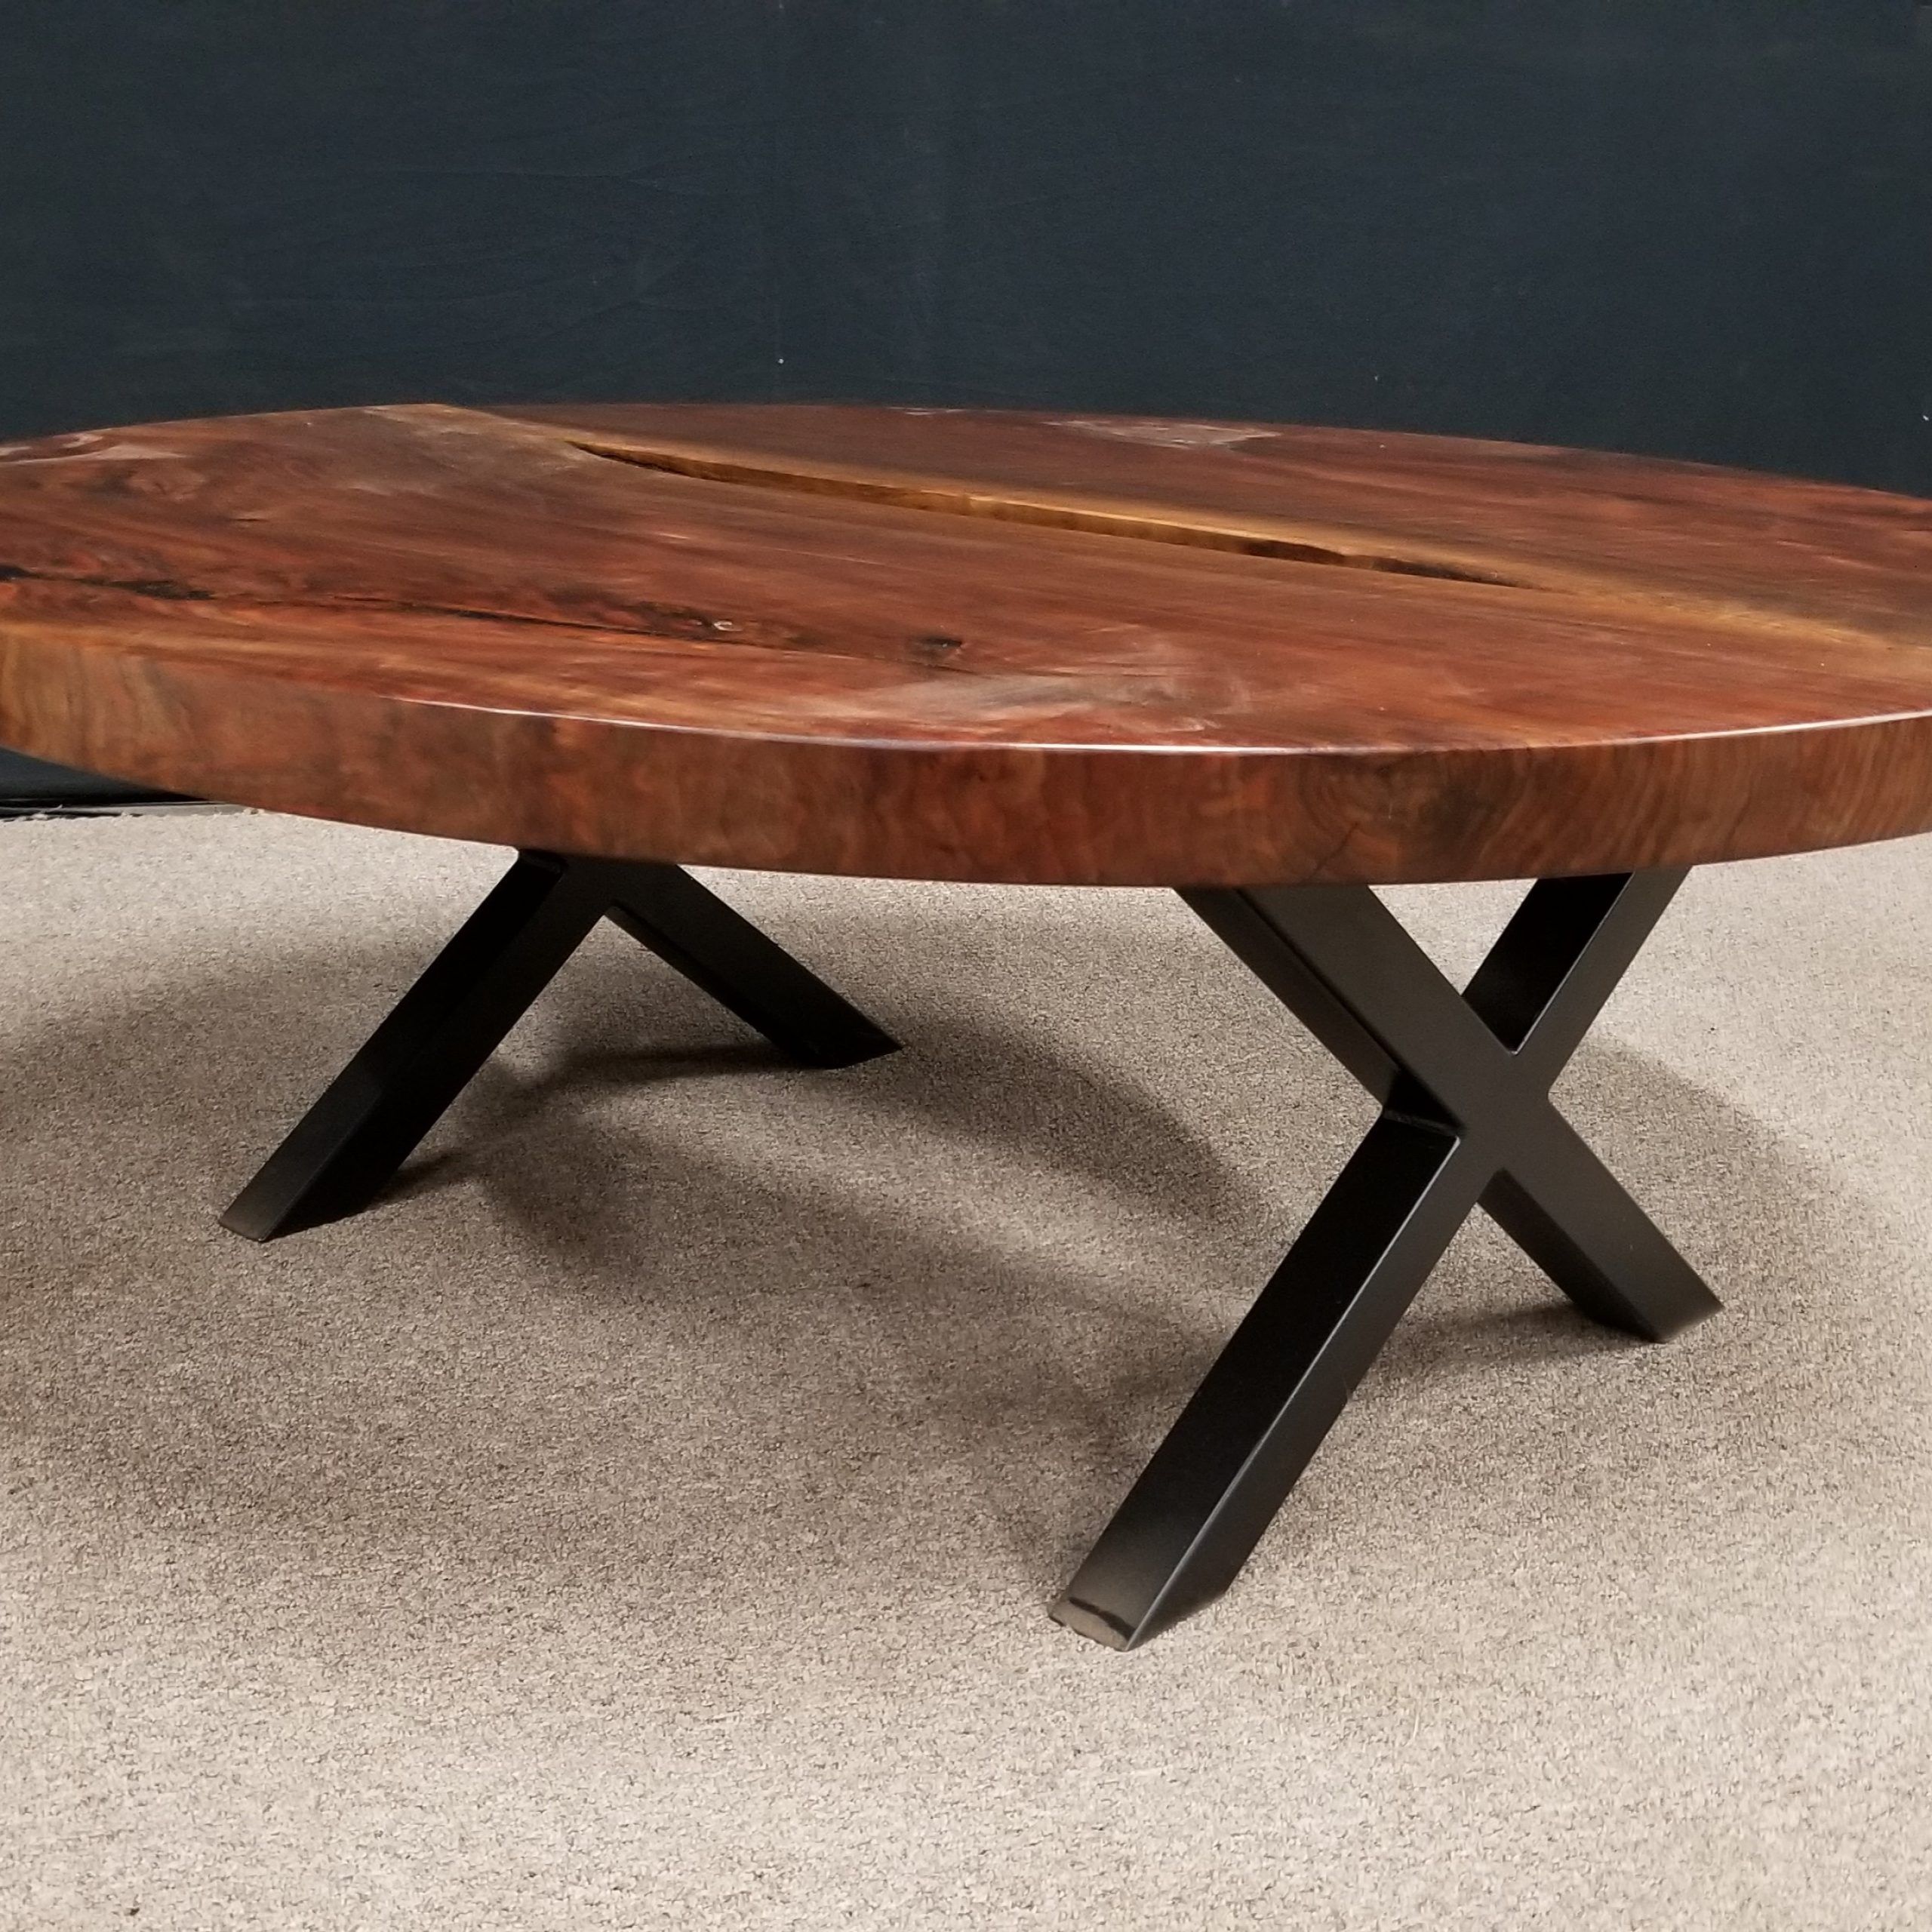 Live Edge Black Walnut Table Round Table #122 – Jewell Intended For Dark Walnut Drink Tables (View 6 of 15)